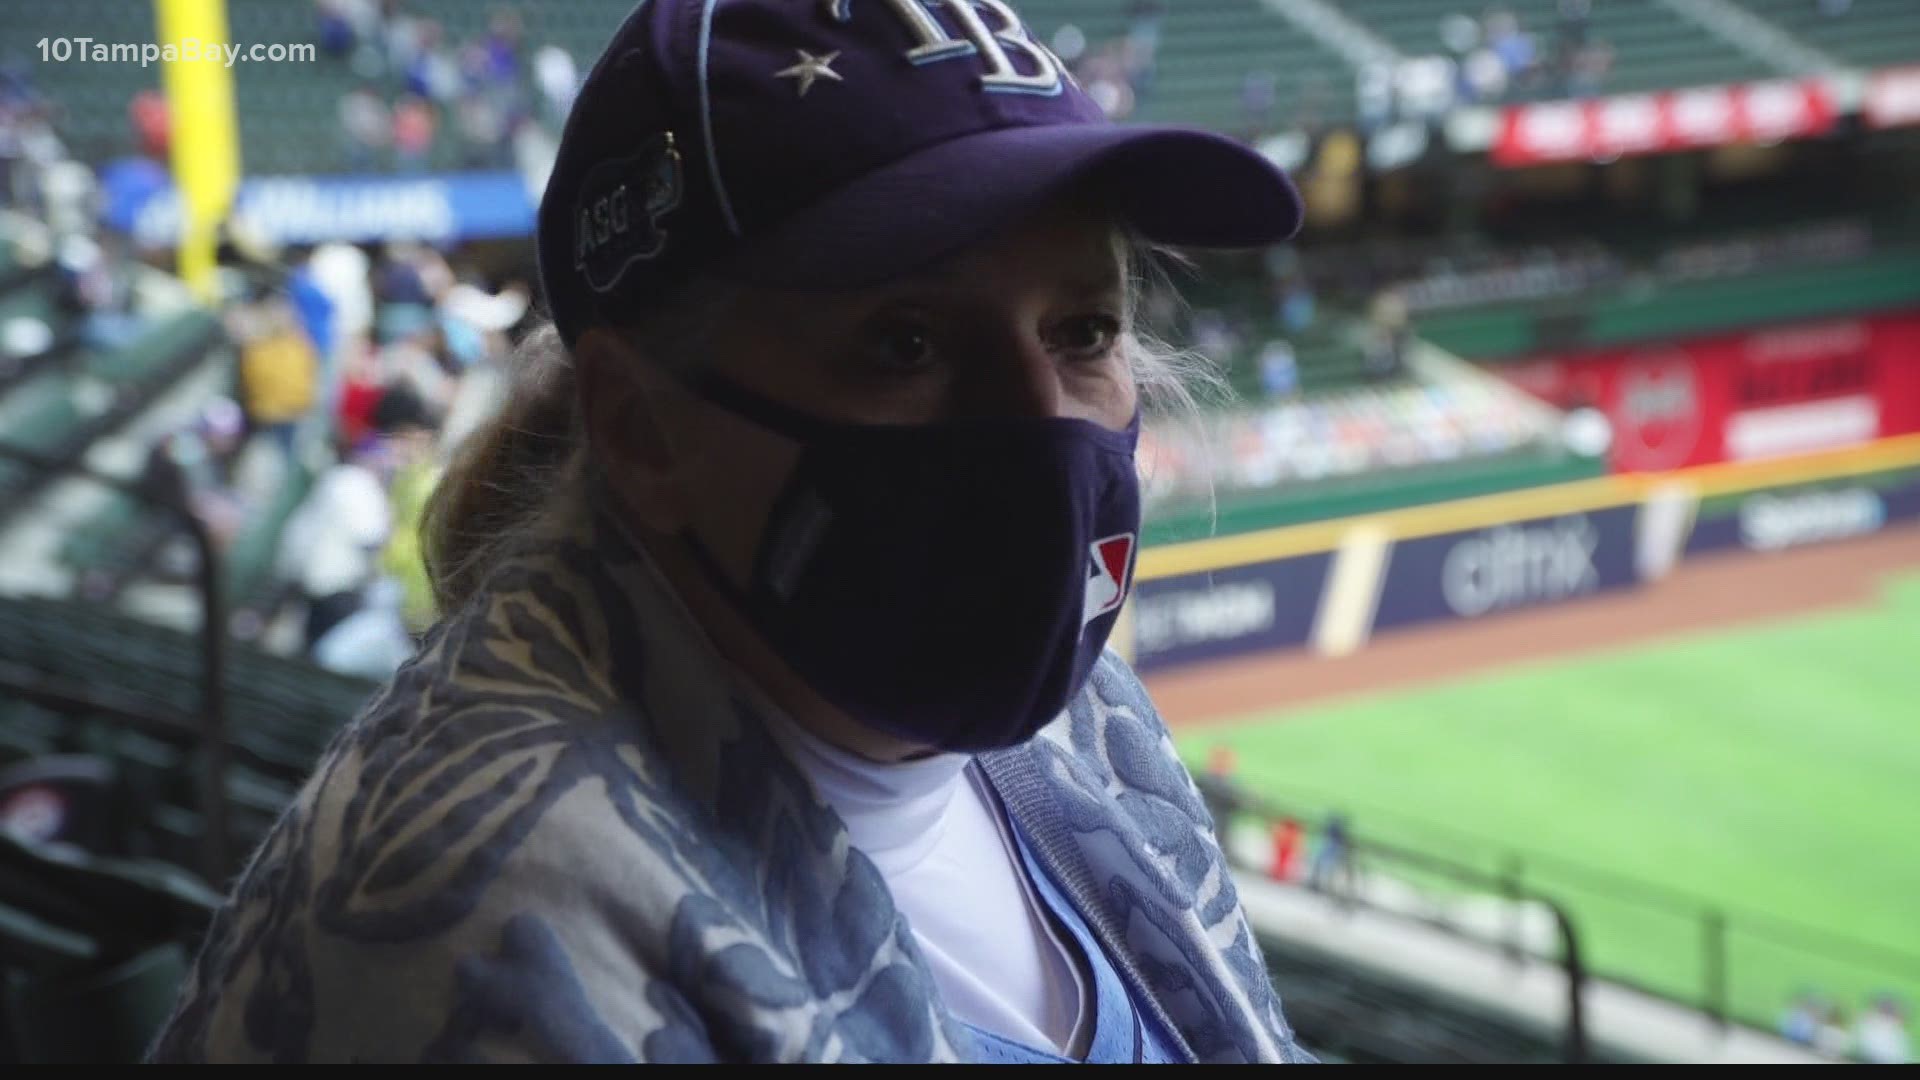 The Rays starter's mother celebrates from a distance due to MLB COVID-19 regulations.